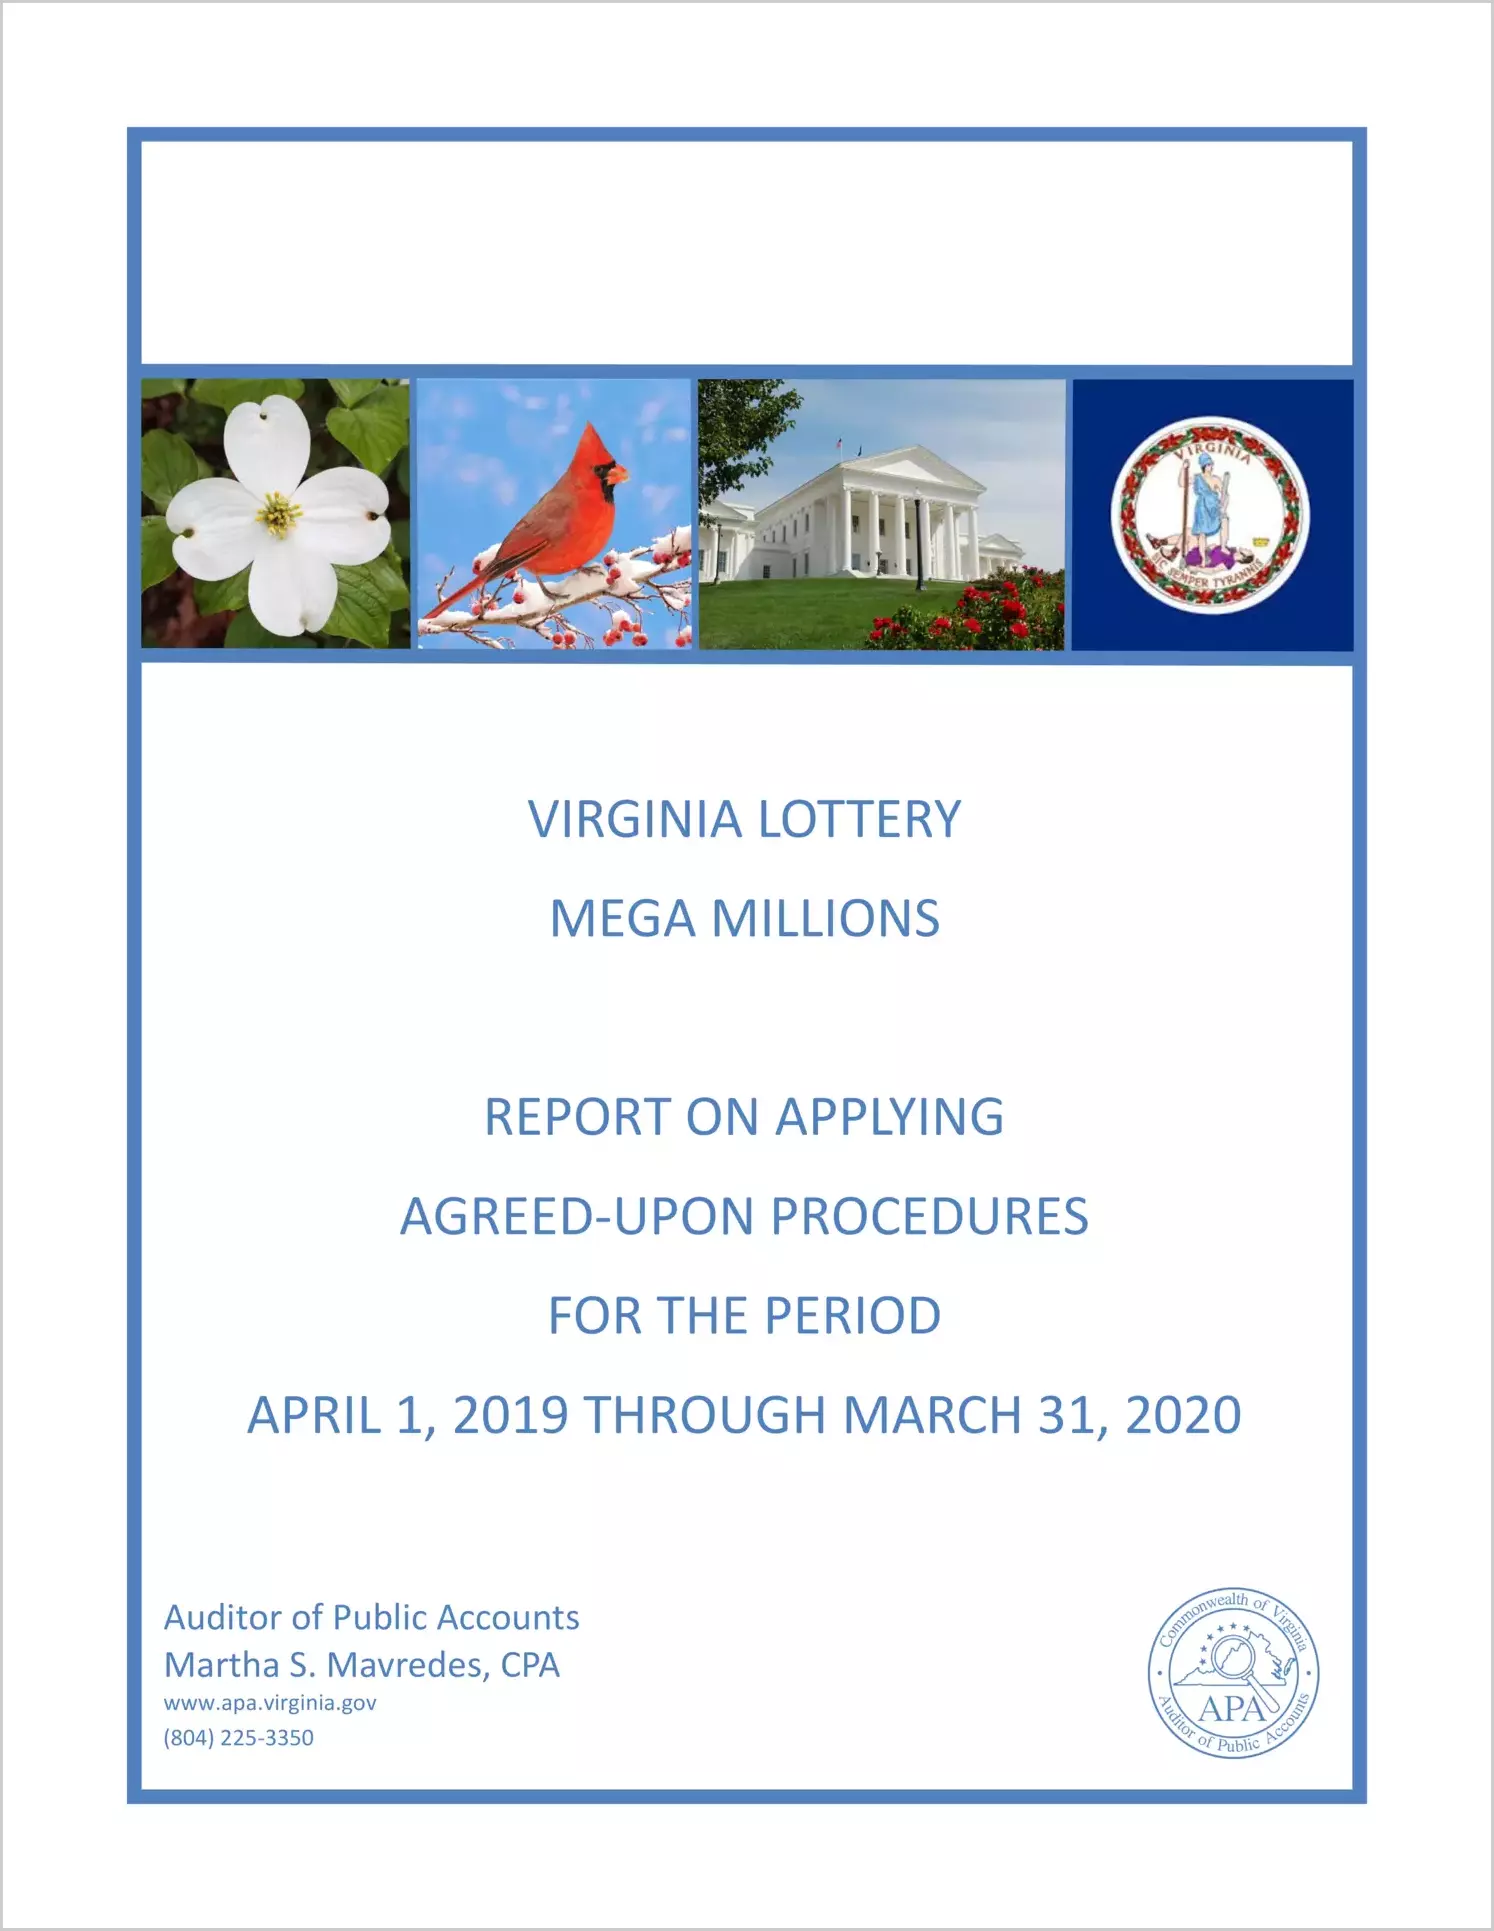 Virginia Lottery Mega Millions Report on Applying Agreed-Upon Procedures for the period April 1, 2019 through March 31, 2020